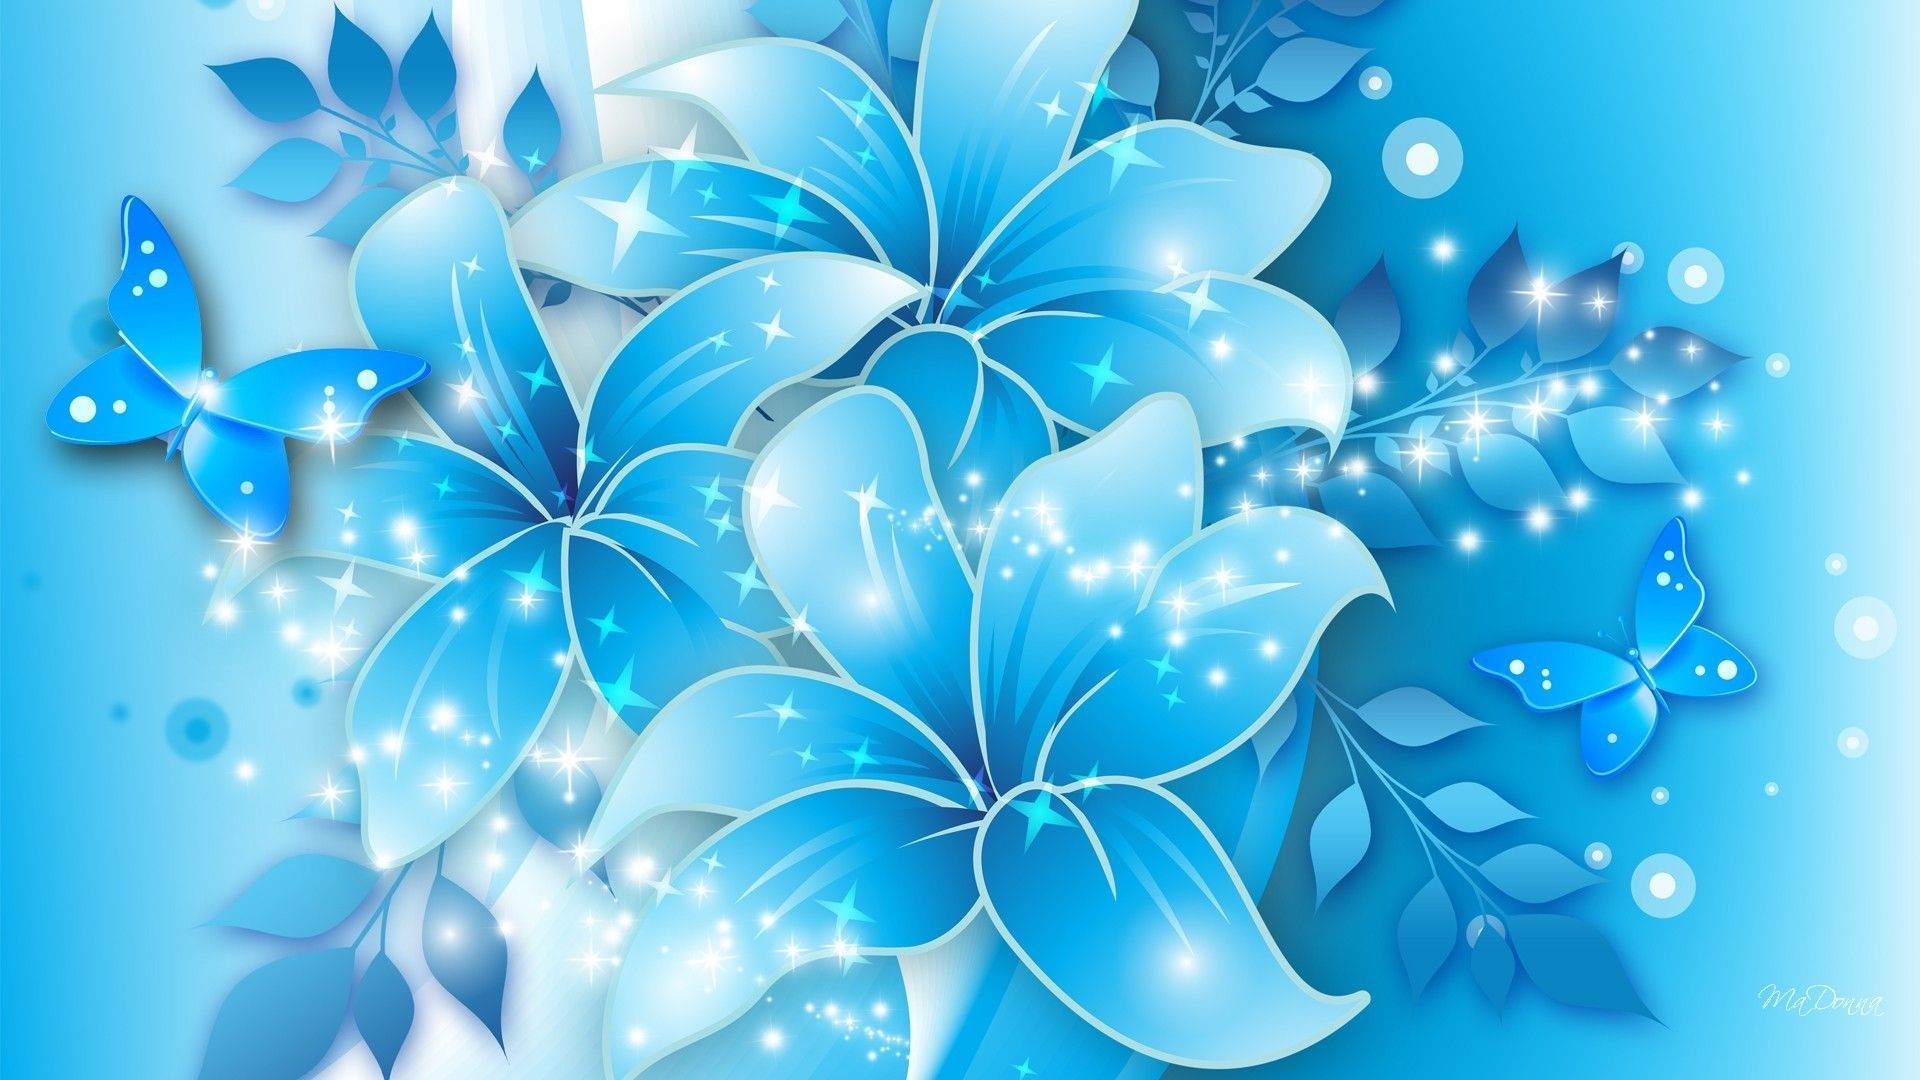 anime butterflies and flowers scenery wallpaper | Stable Diffusion | OpenArt-demhanvico.com.vn